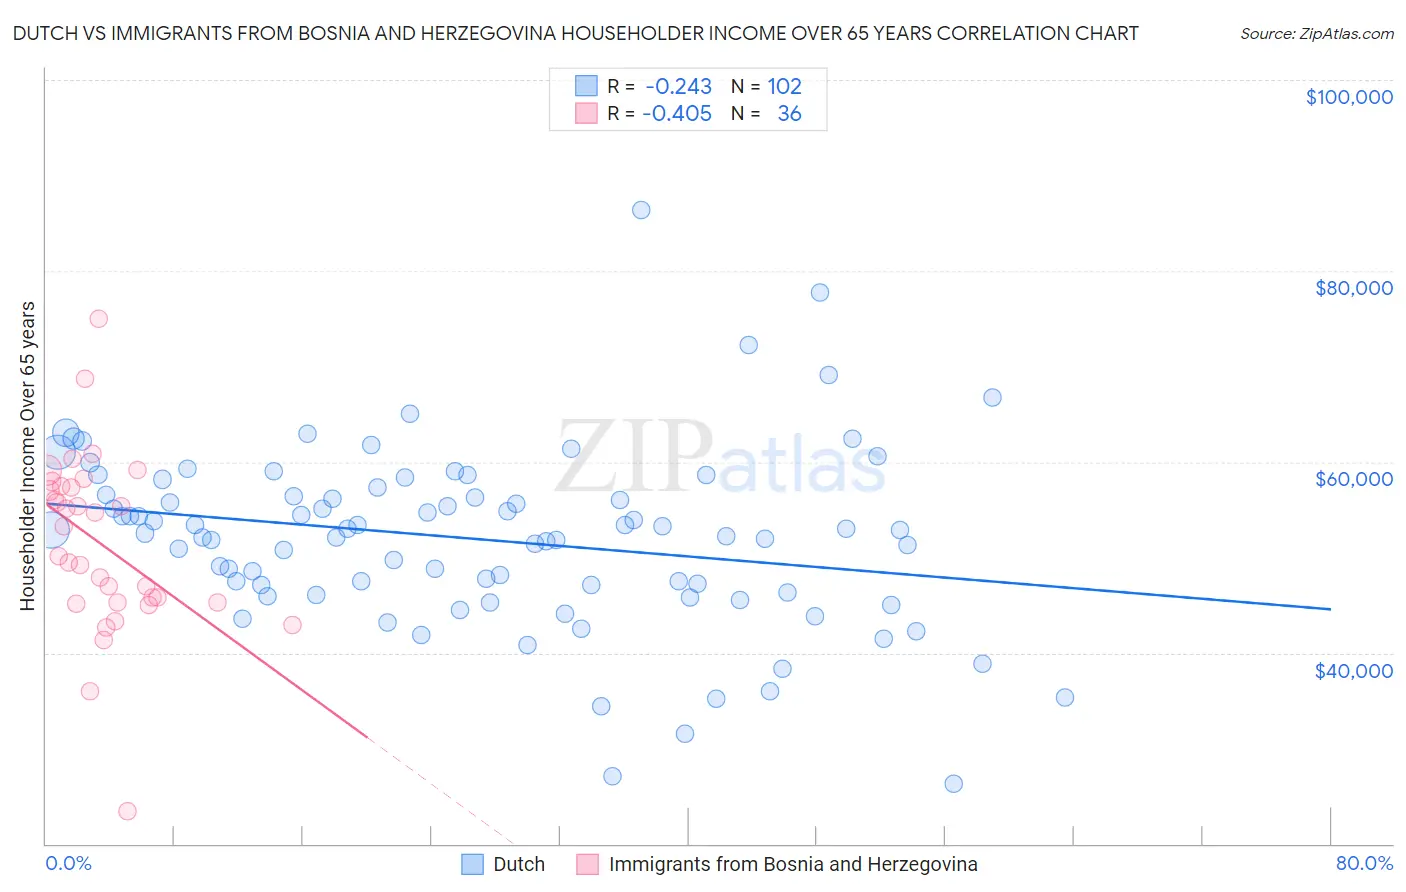 Dutch vs Immigrants from Bosnia and Herzegovina Householder Income Over 65 years